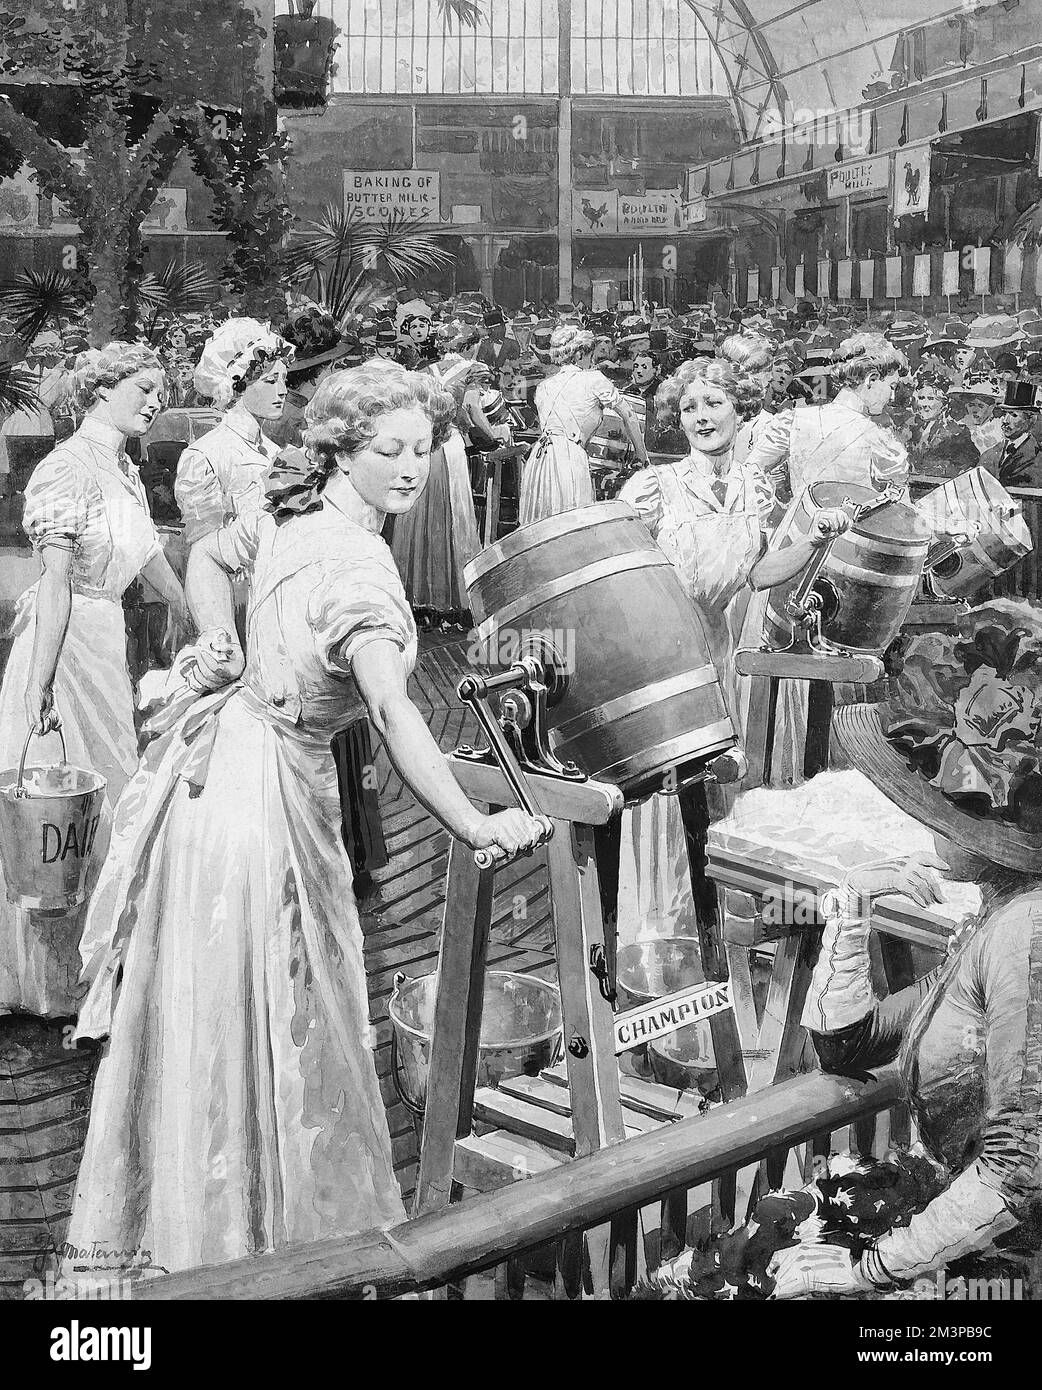 Women churning buttermilk at a trade exhibition. Stock Photo